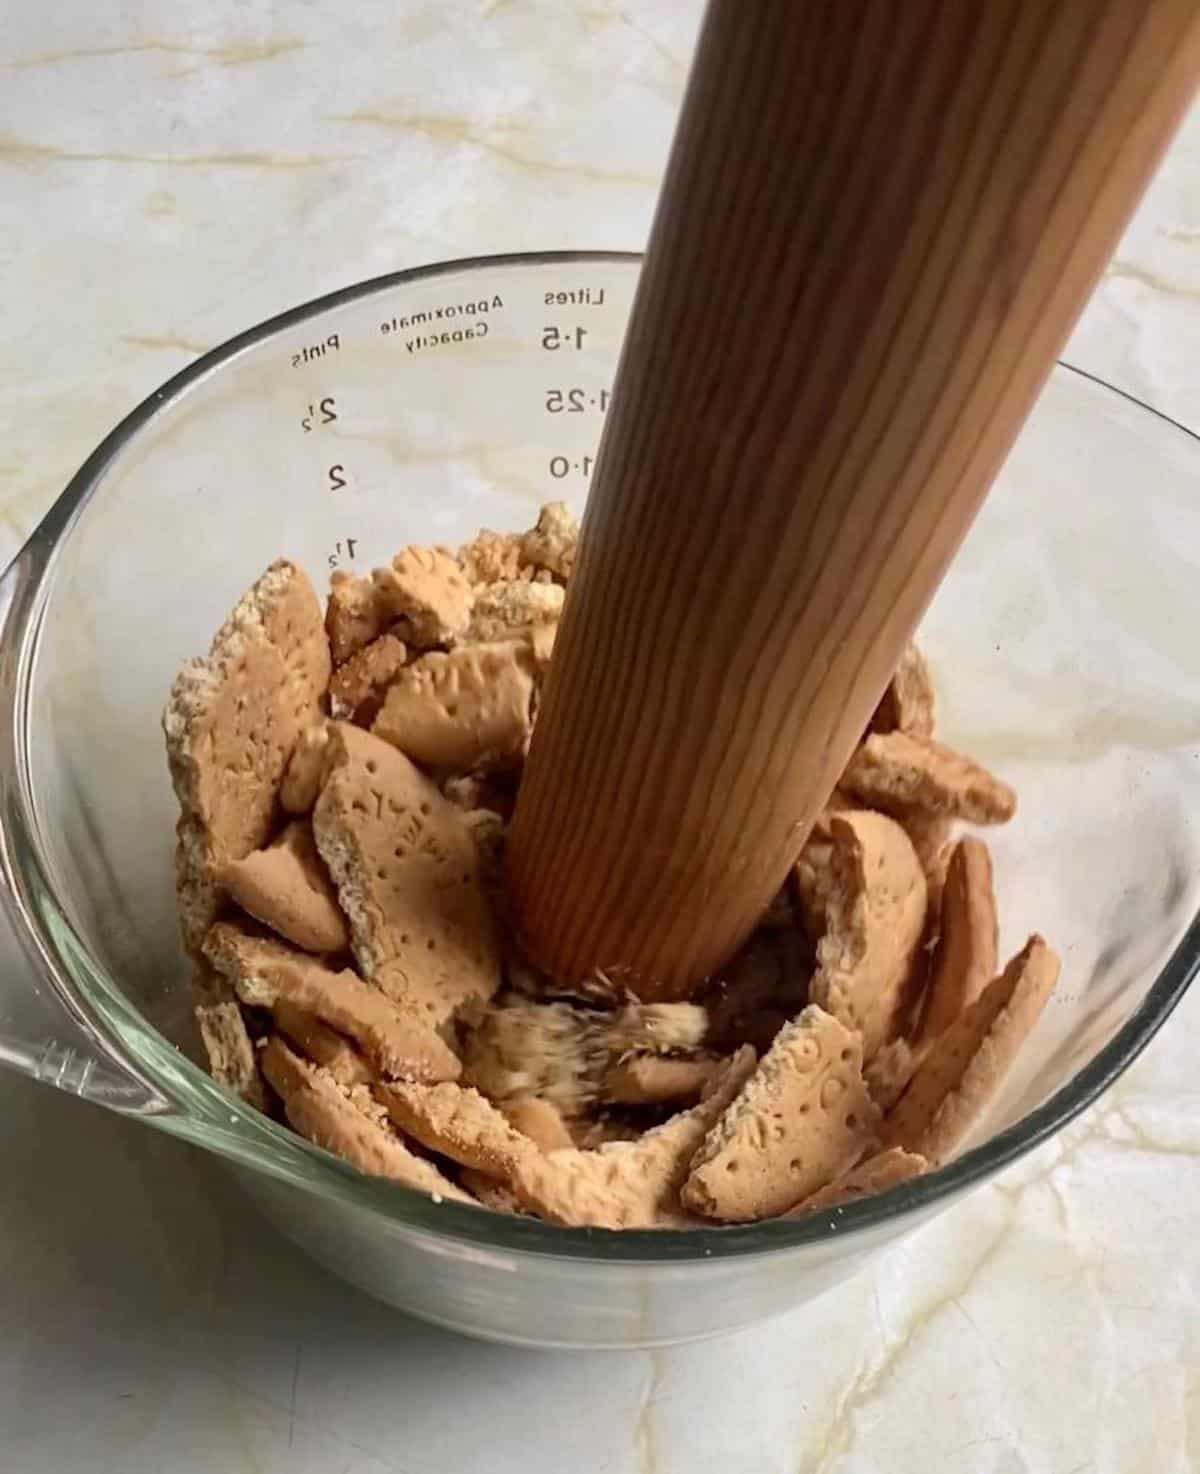 A bowl full of biscuits or cookies being crushed with the end of a rolling pin for the biscuit base